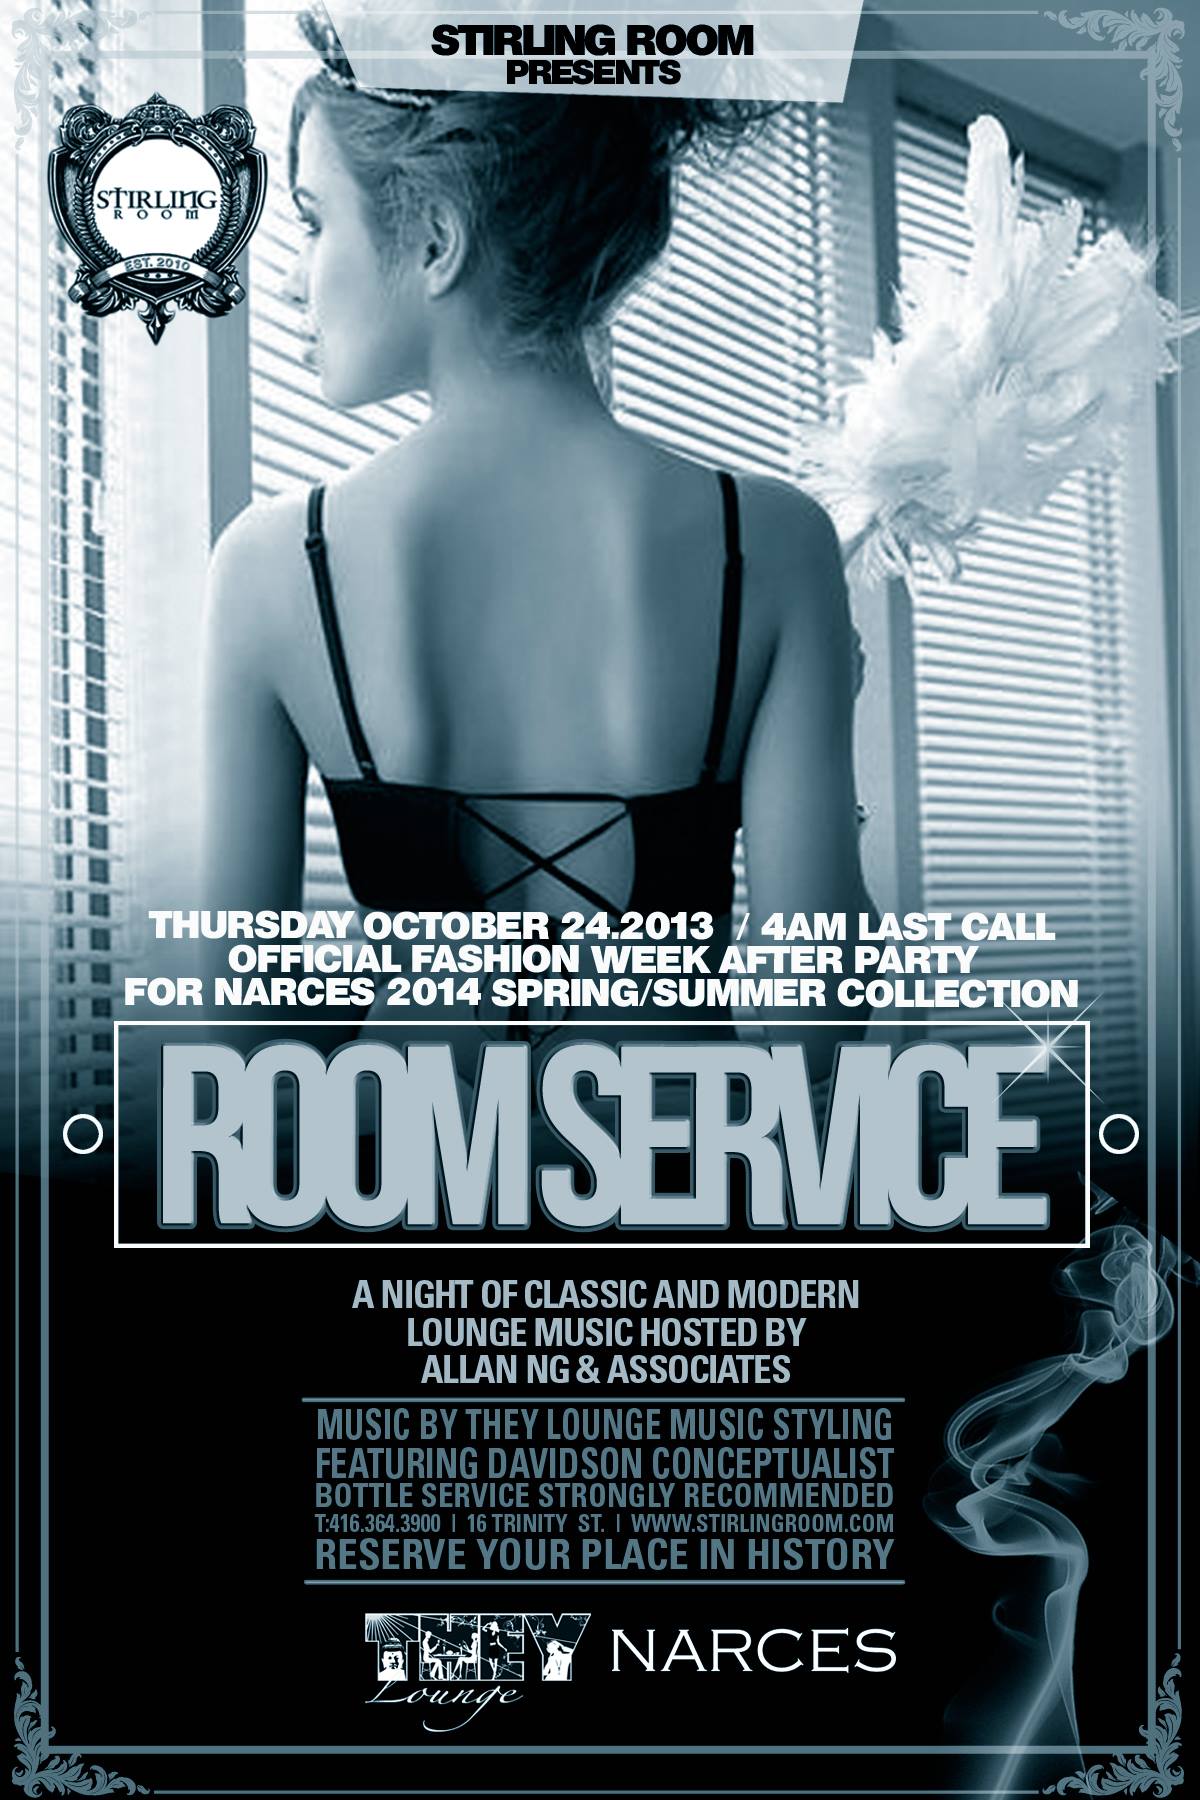 ROOM SERVICE featuring NARCES at STIRLING ROOM for FASHION WEEK | OCT 24 | 4AM